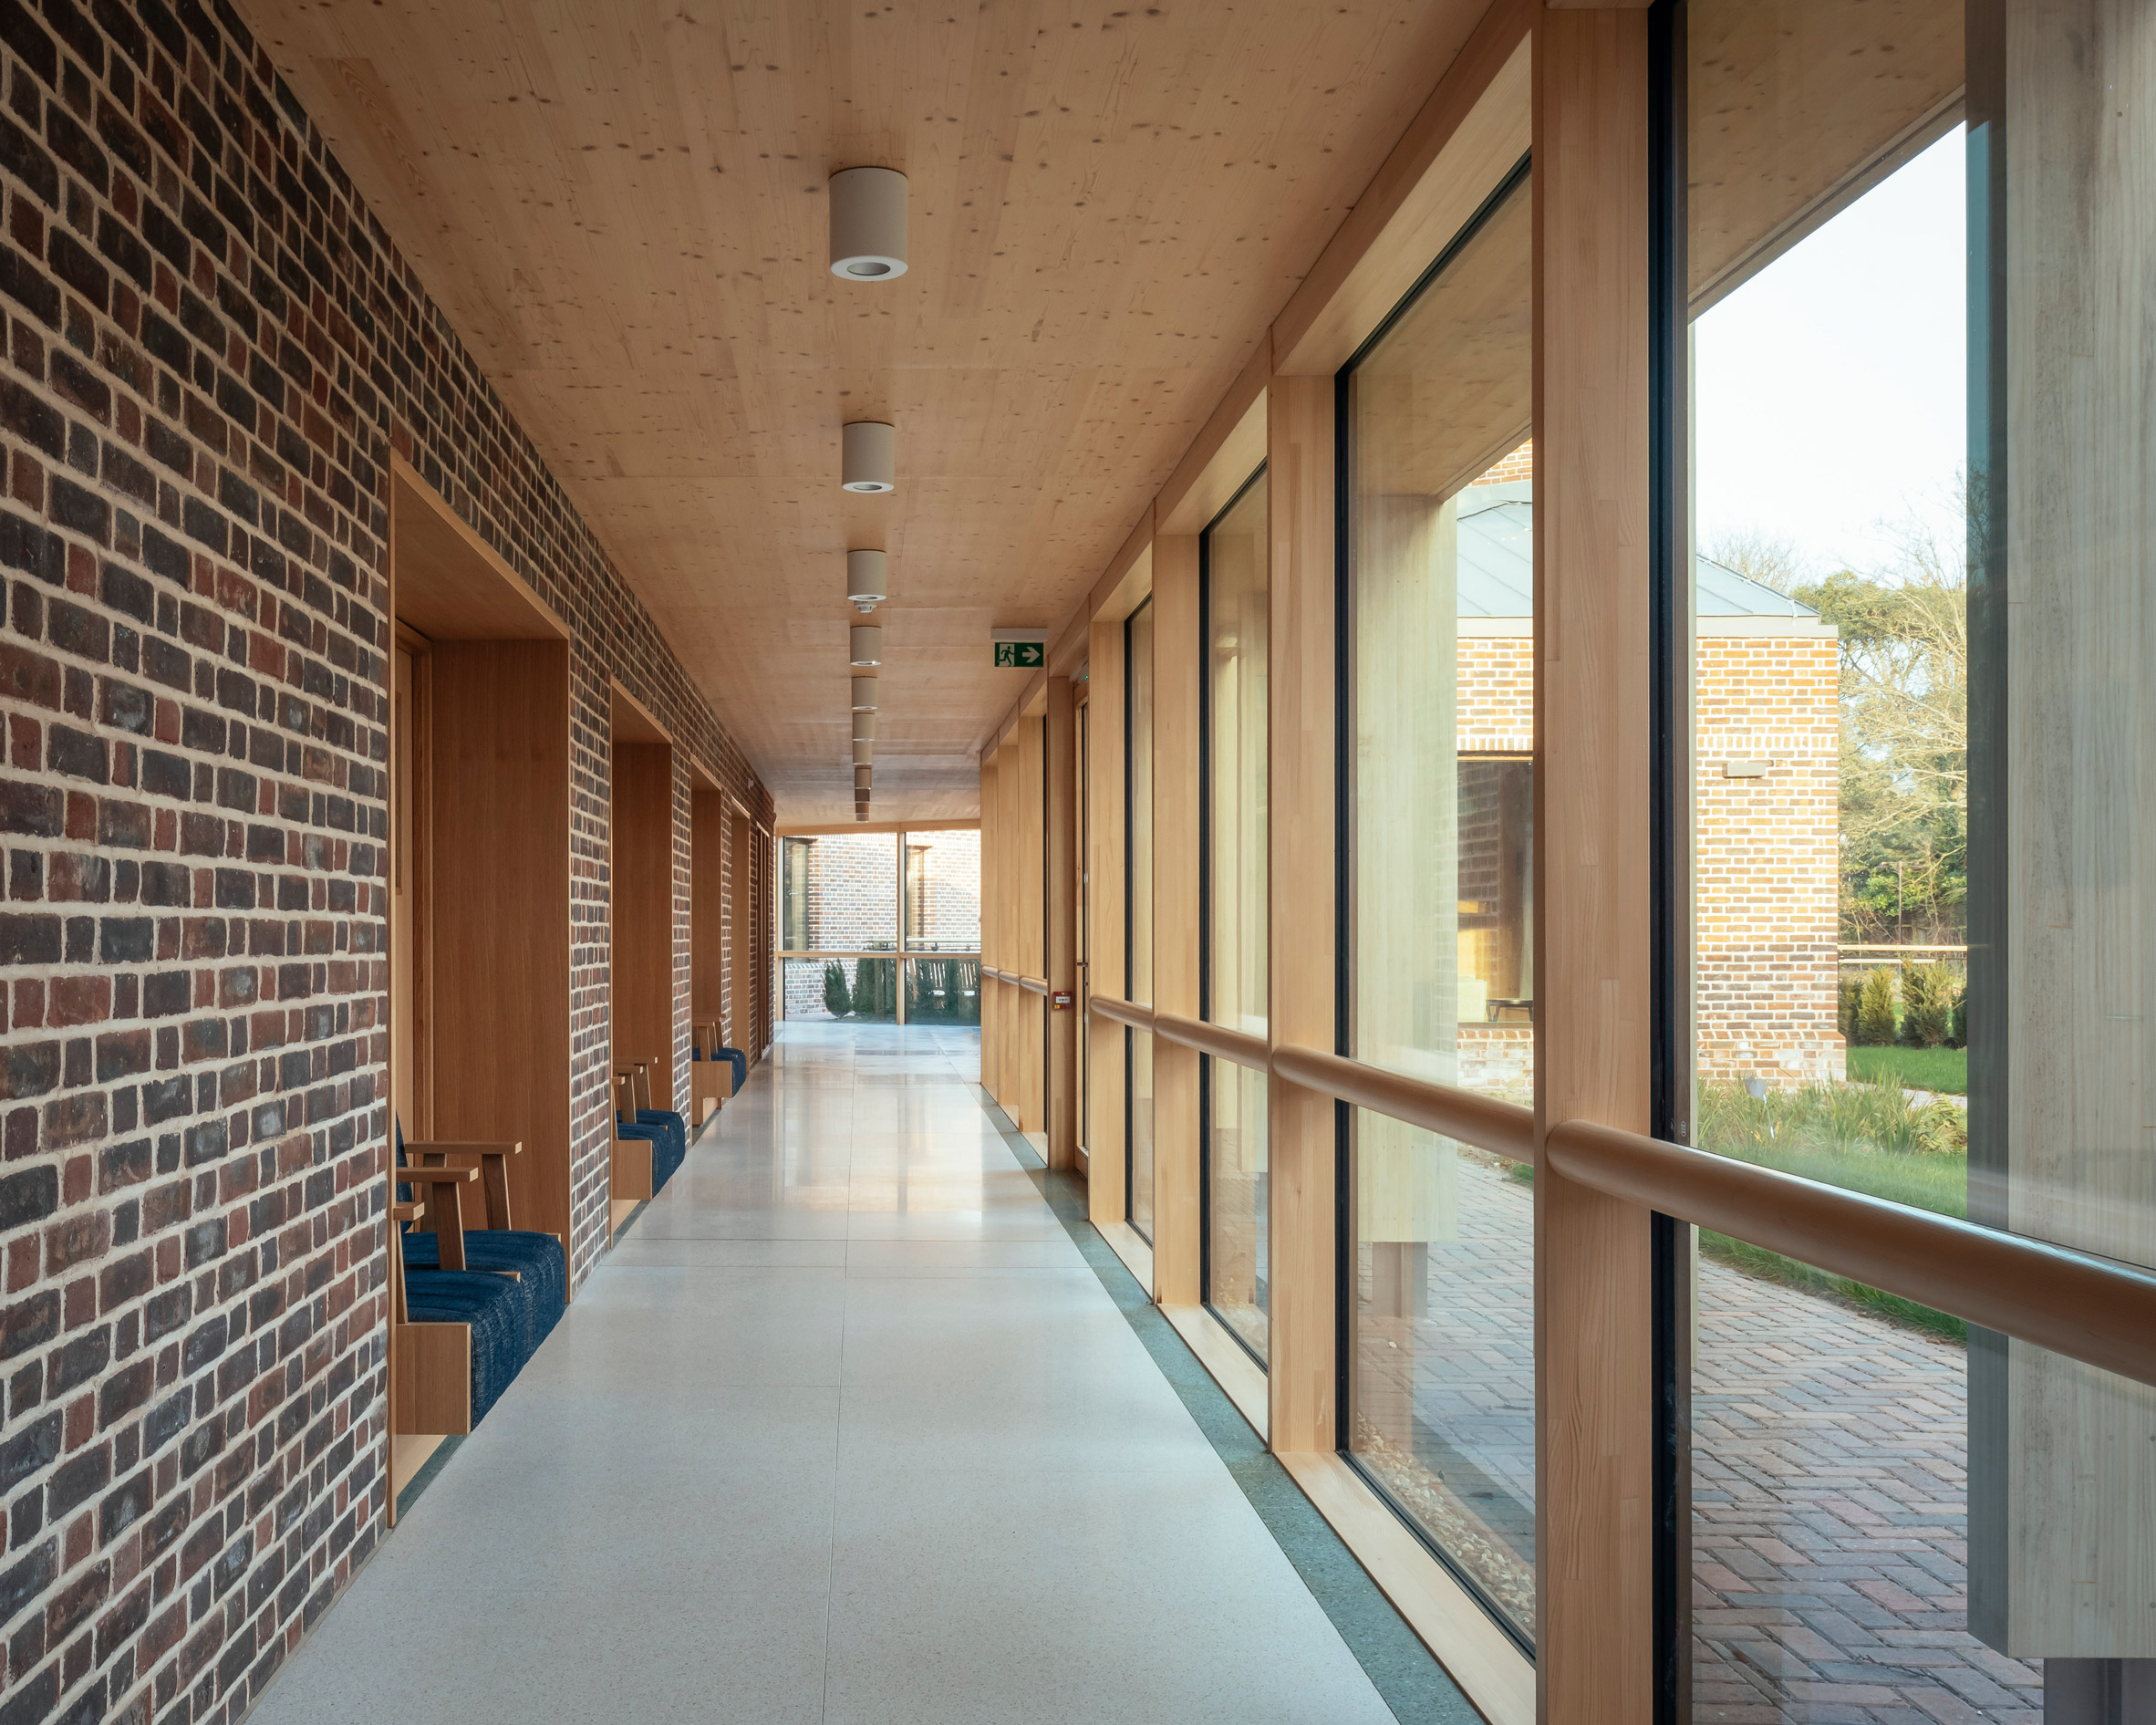 Cloister in John Morden Centre by Mae Architects